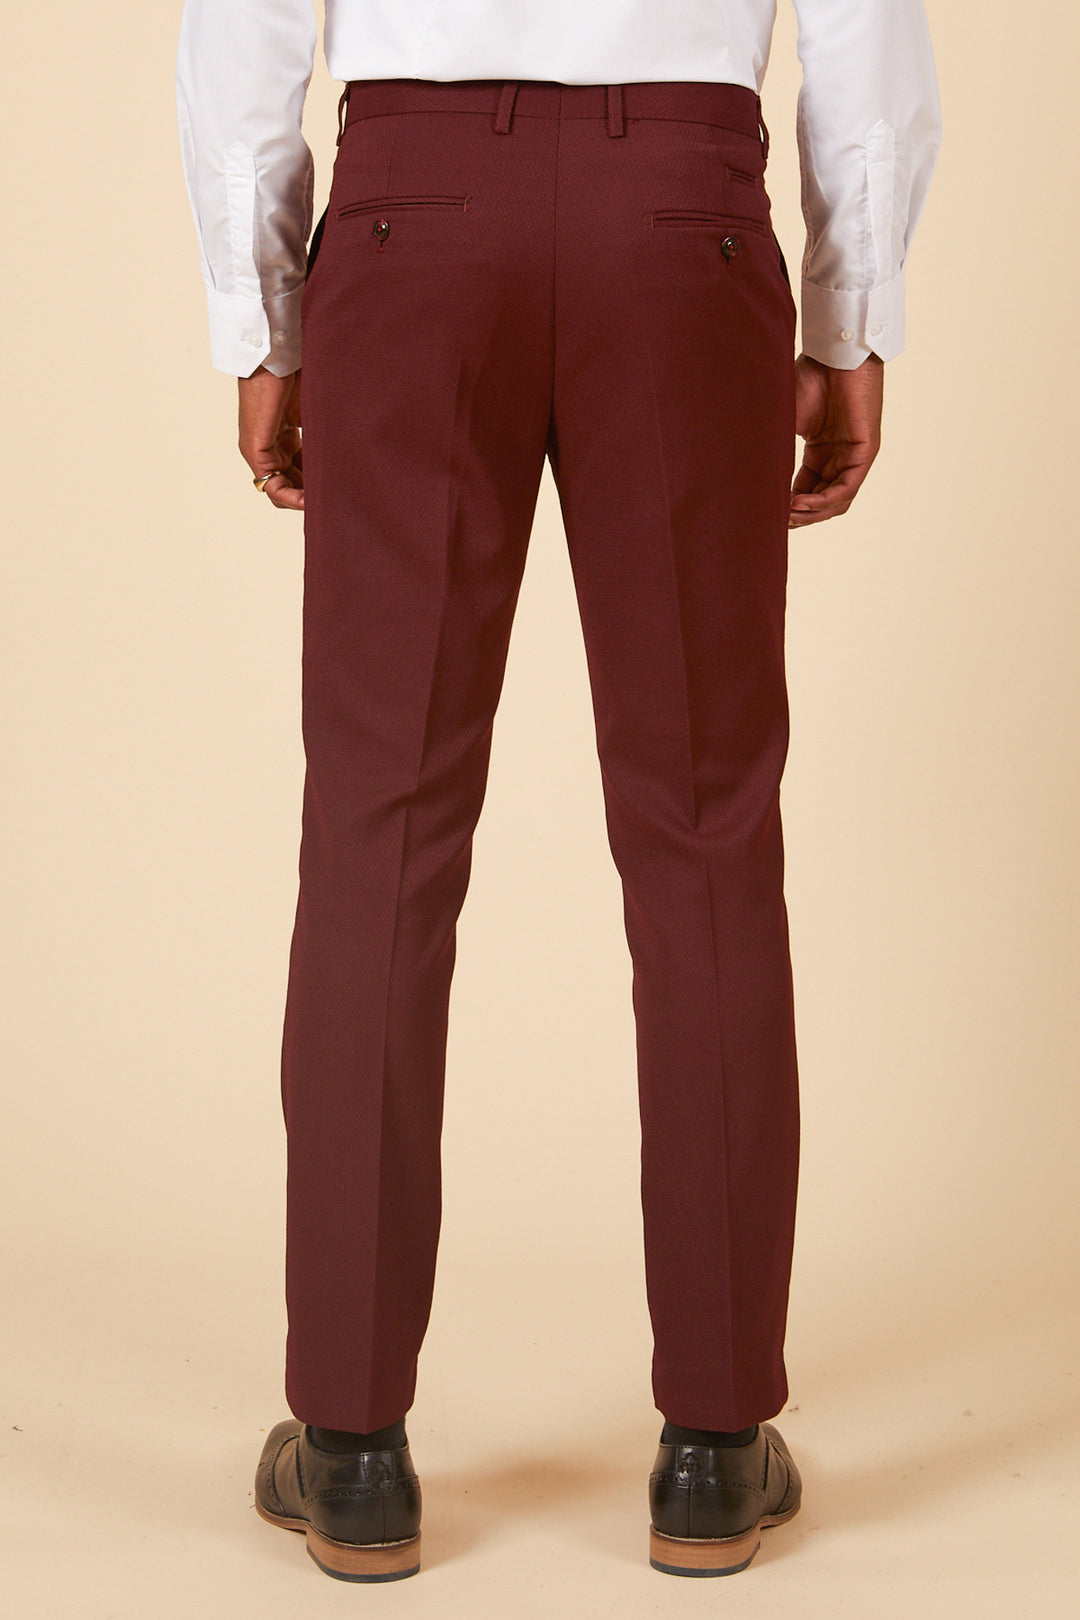 MAX - Wine Tailored Trousers